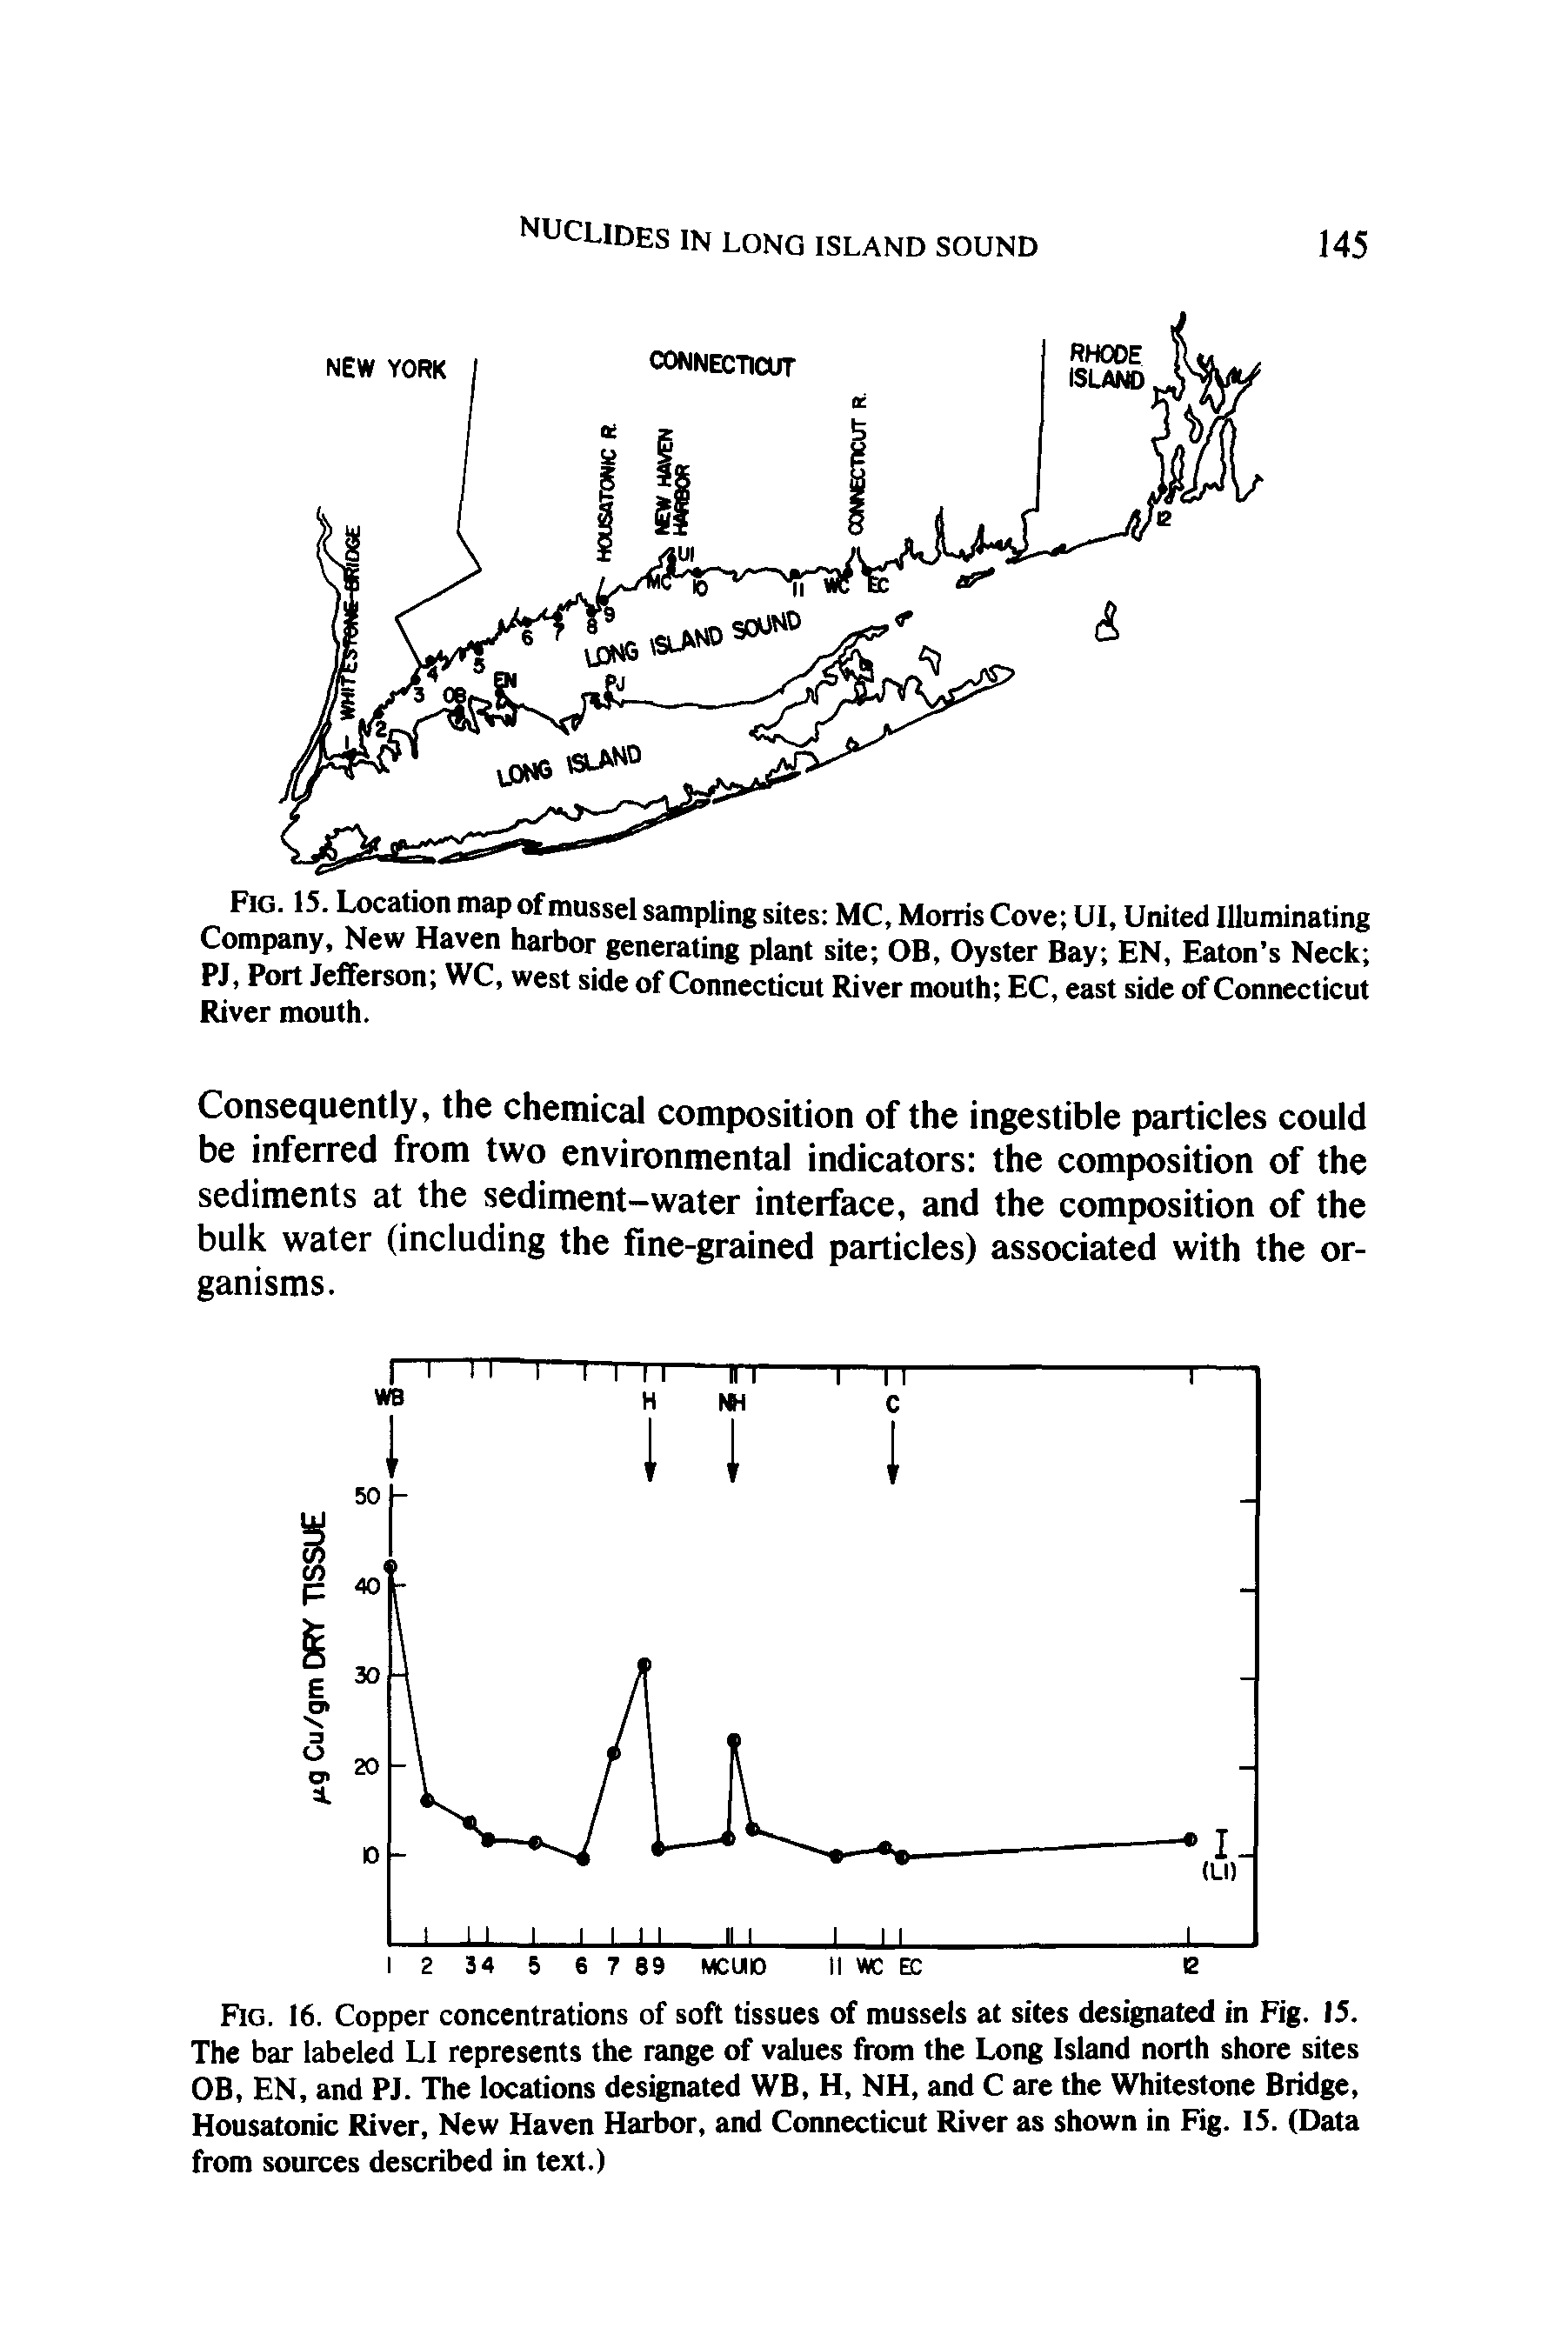 Fig. 16. Copper concentrations of soft tissues of mussels at sites designated in Fig. 15. The bar labeled LI represents the range of values from the Long Island north shore sites OB, EN, and PJ. The locations designated WB, H, NH, and C are the Whitestone Bridge, Housatonic River, New Haven Harbor, and Connecticut River as shown in Fig. 15. (Data from sources described in text.)...